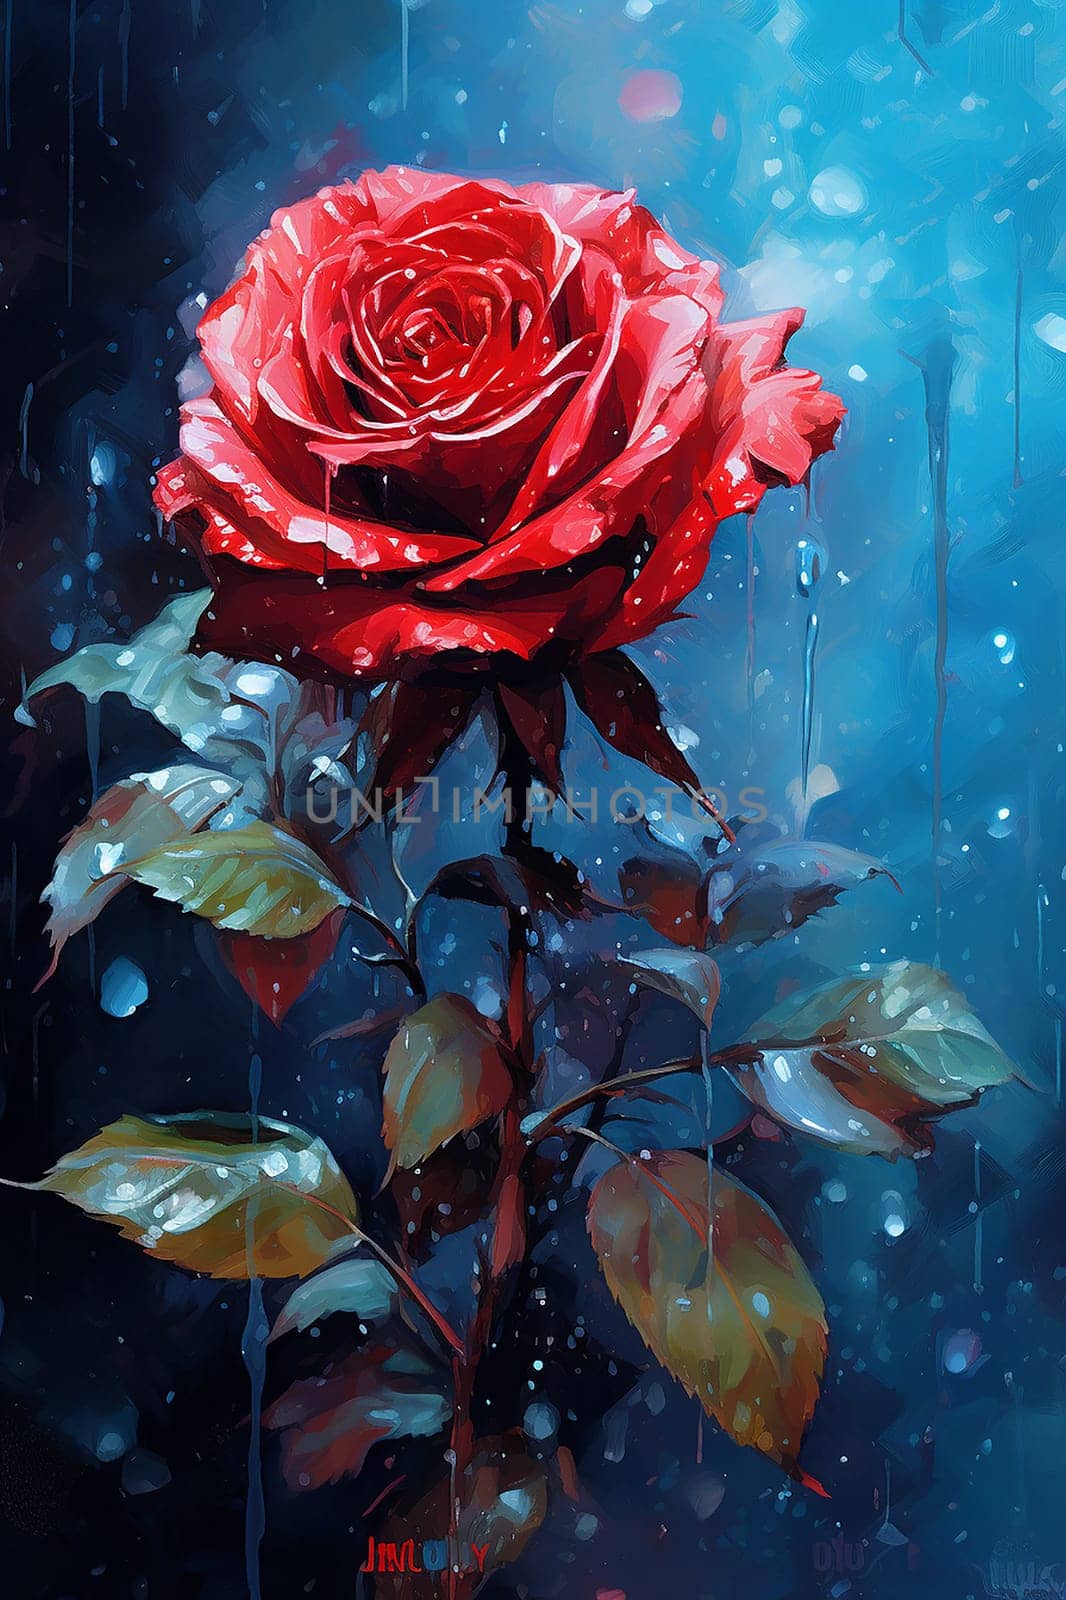 Vibrant red rose against a moody, rain-streaked blue backdrop